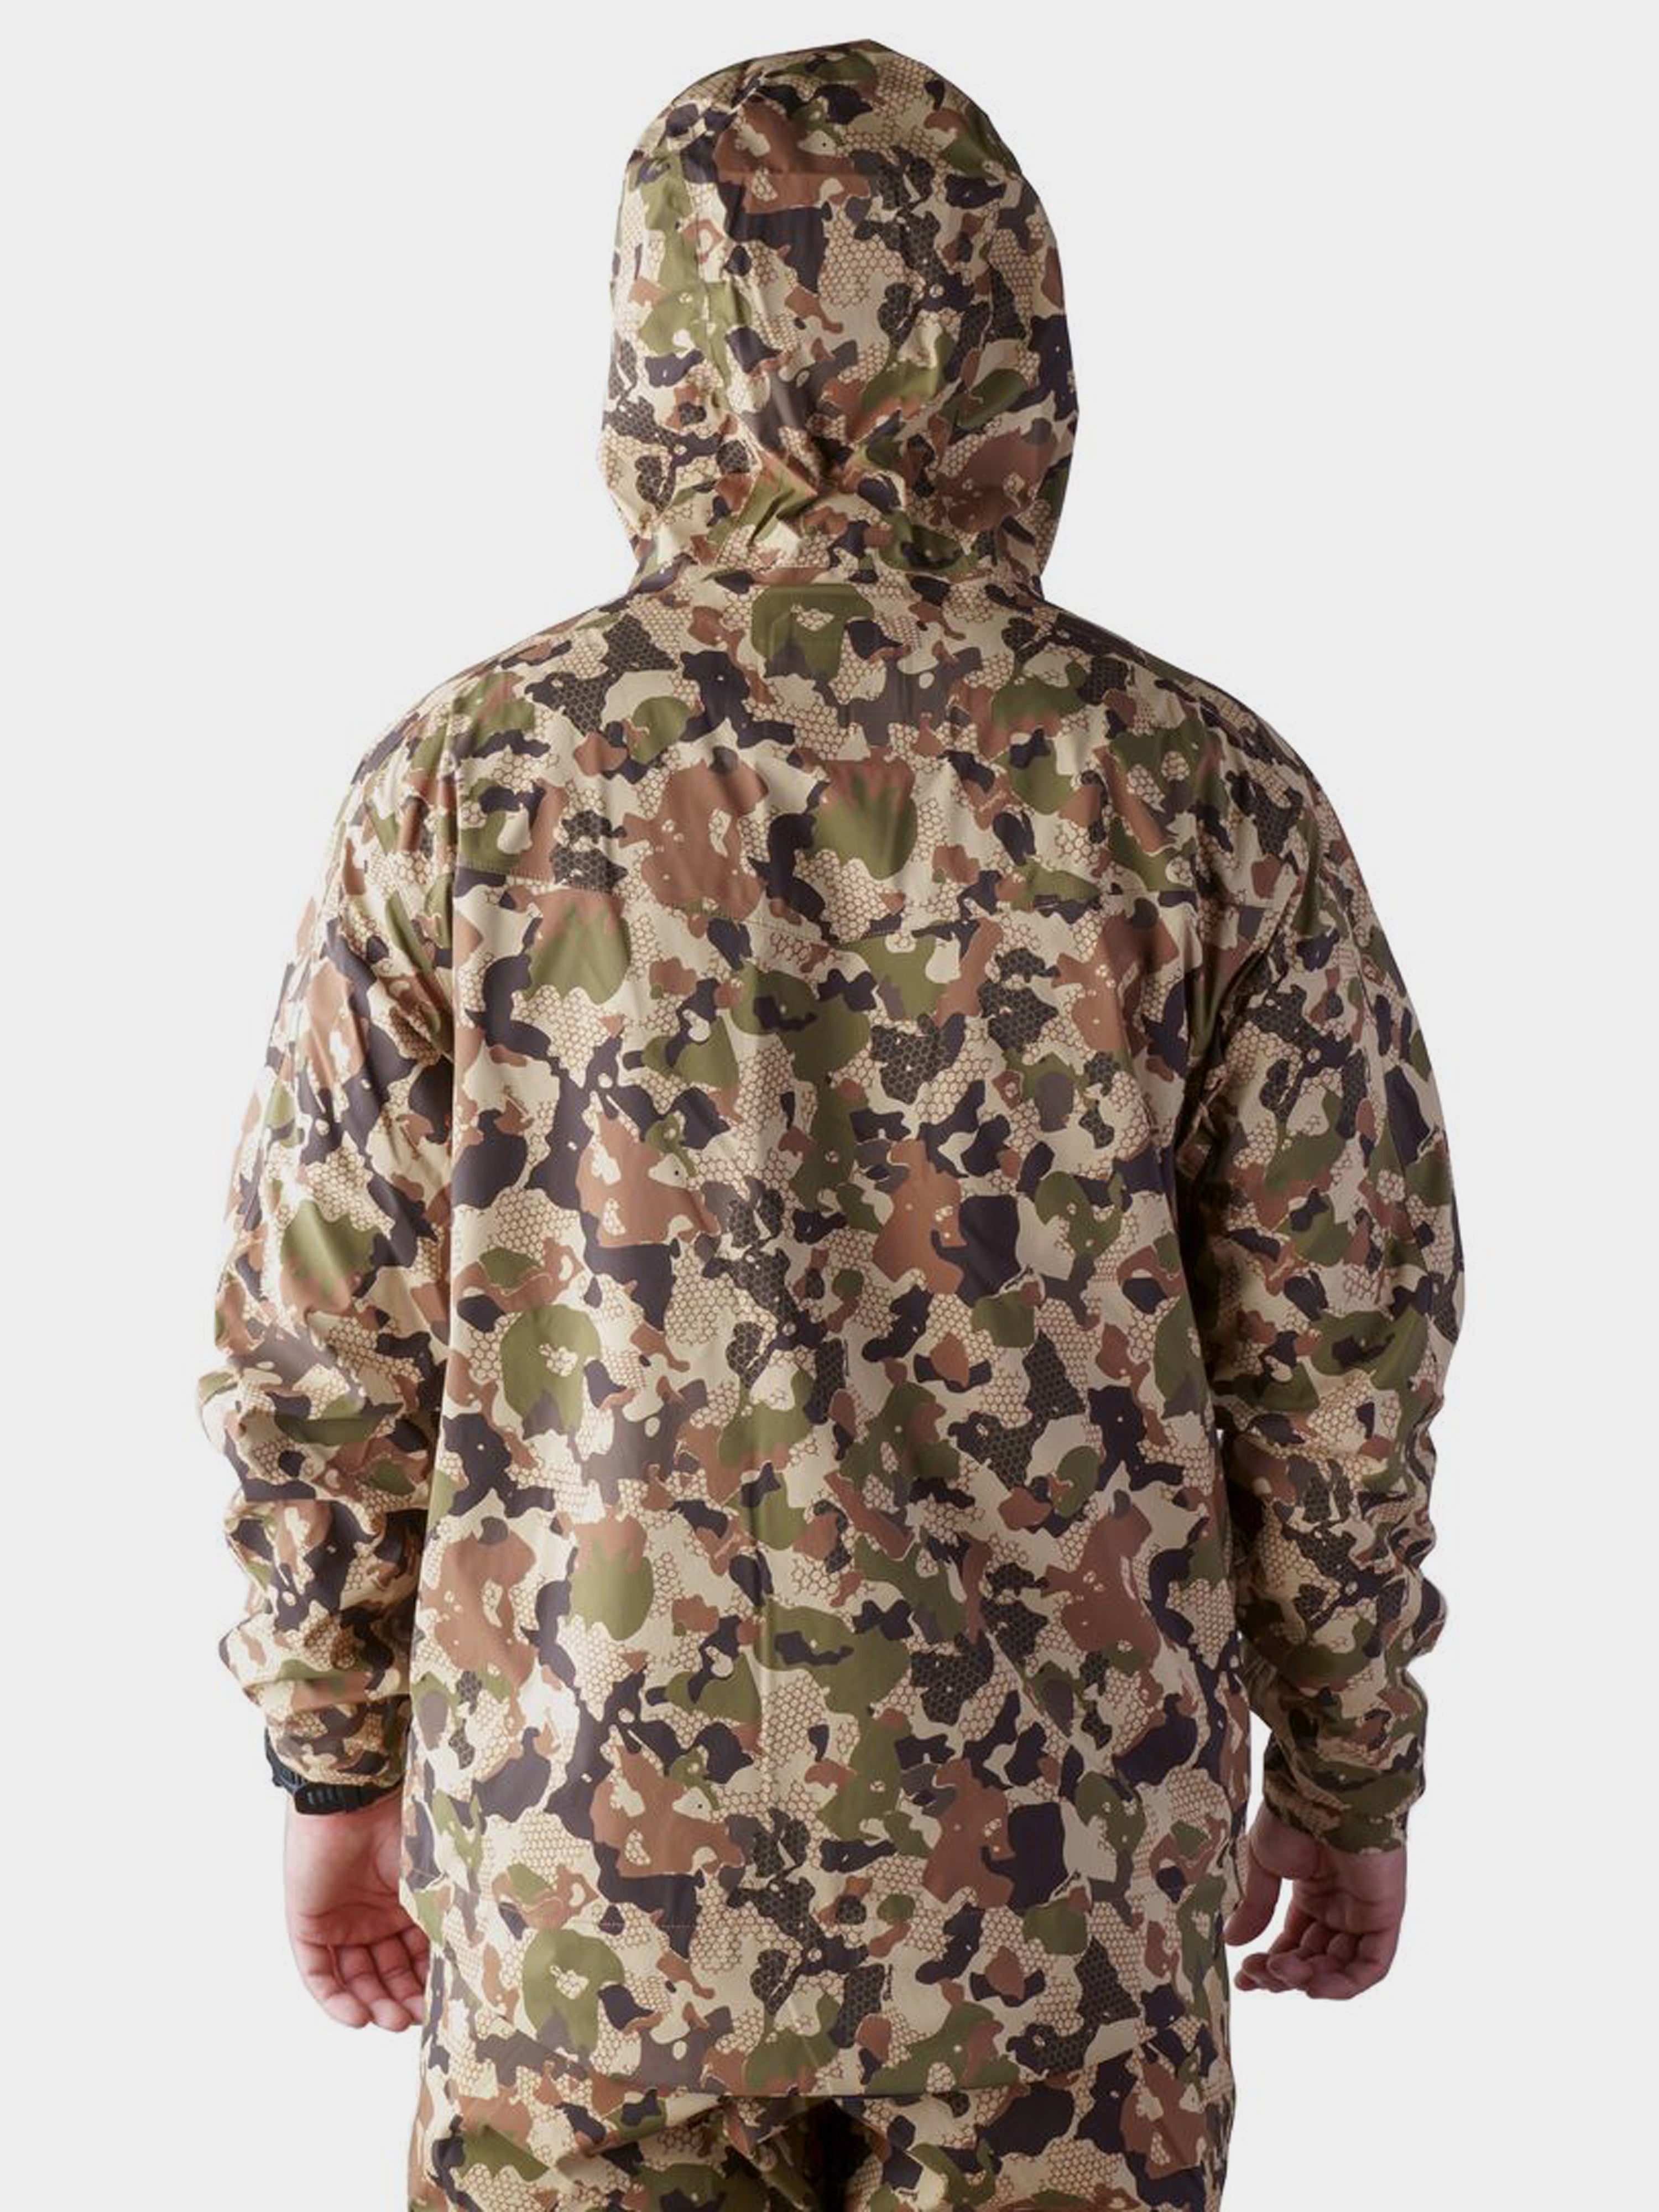 Special Ops Waterproof Soft Shell Camouflage Tactical Jacket